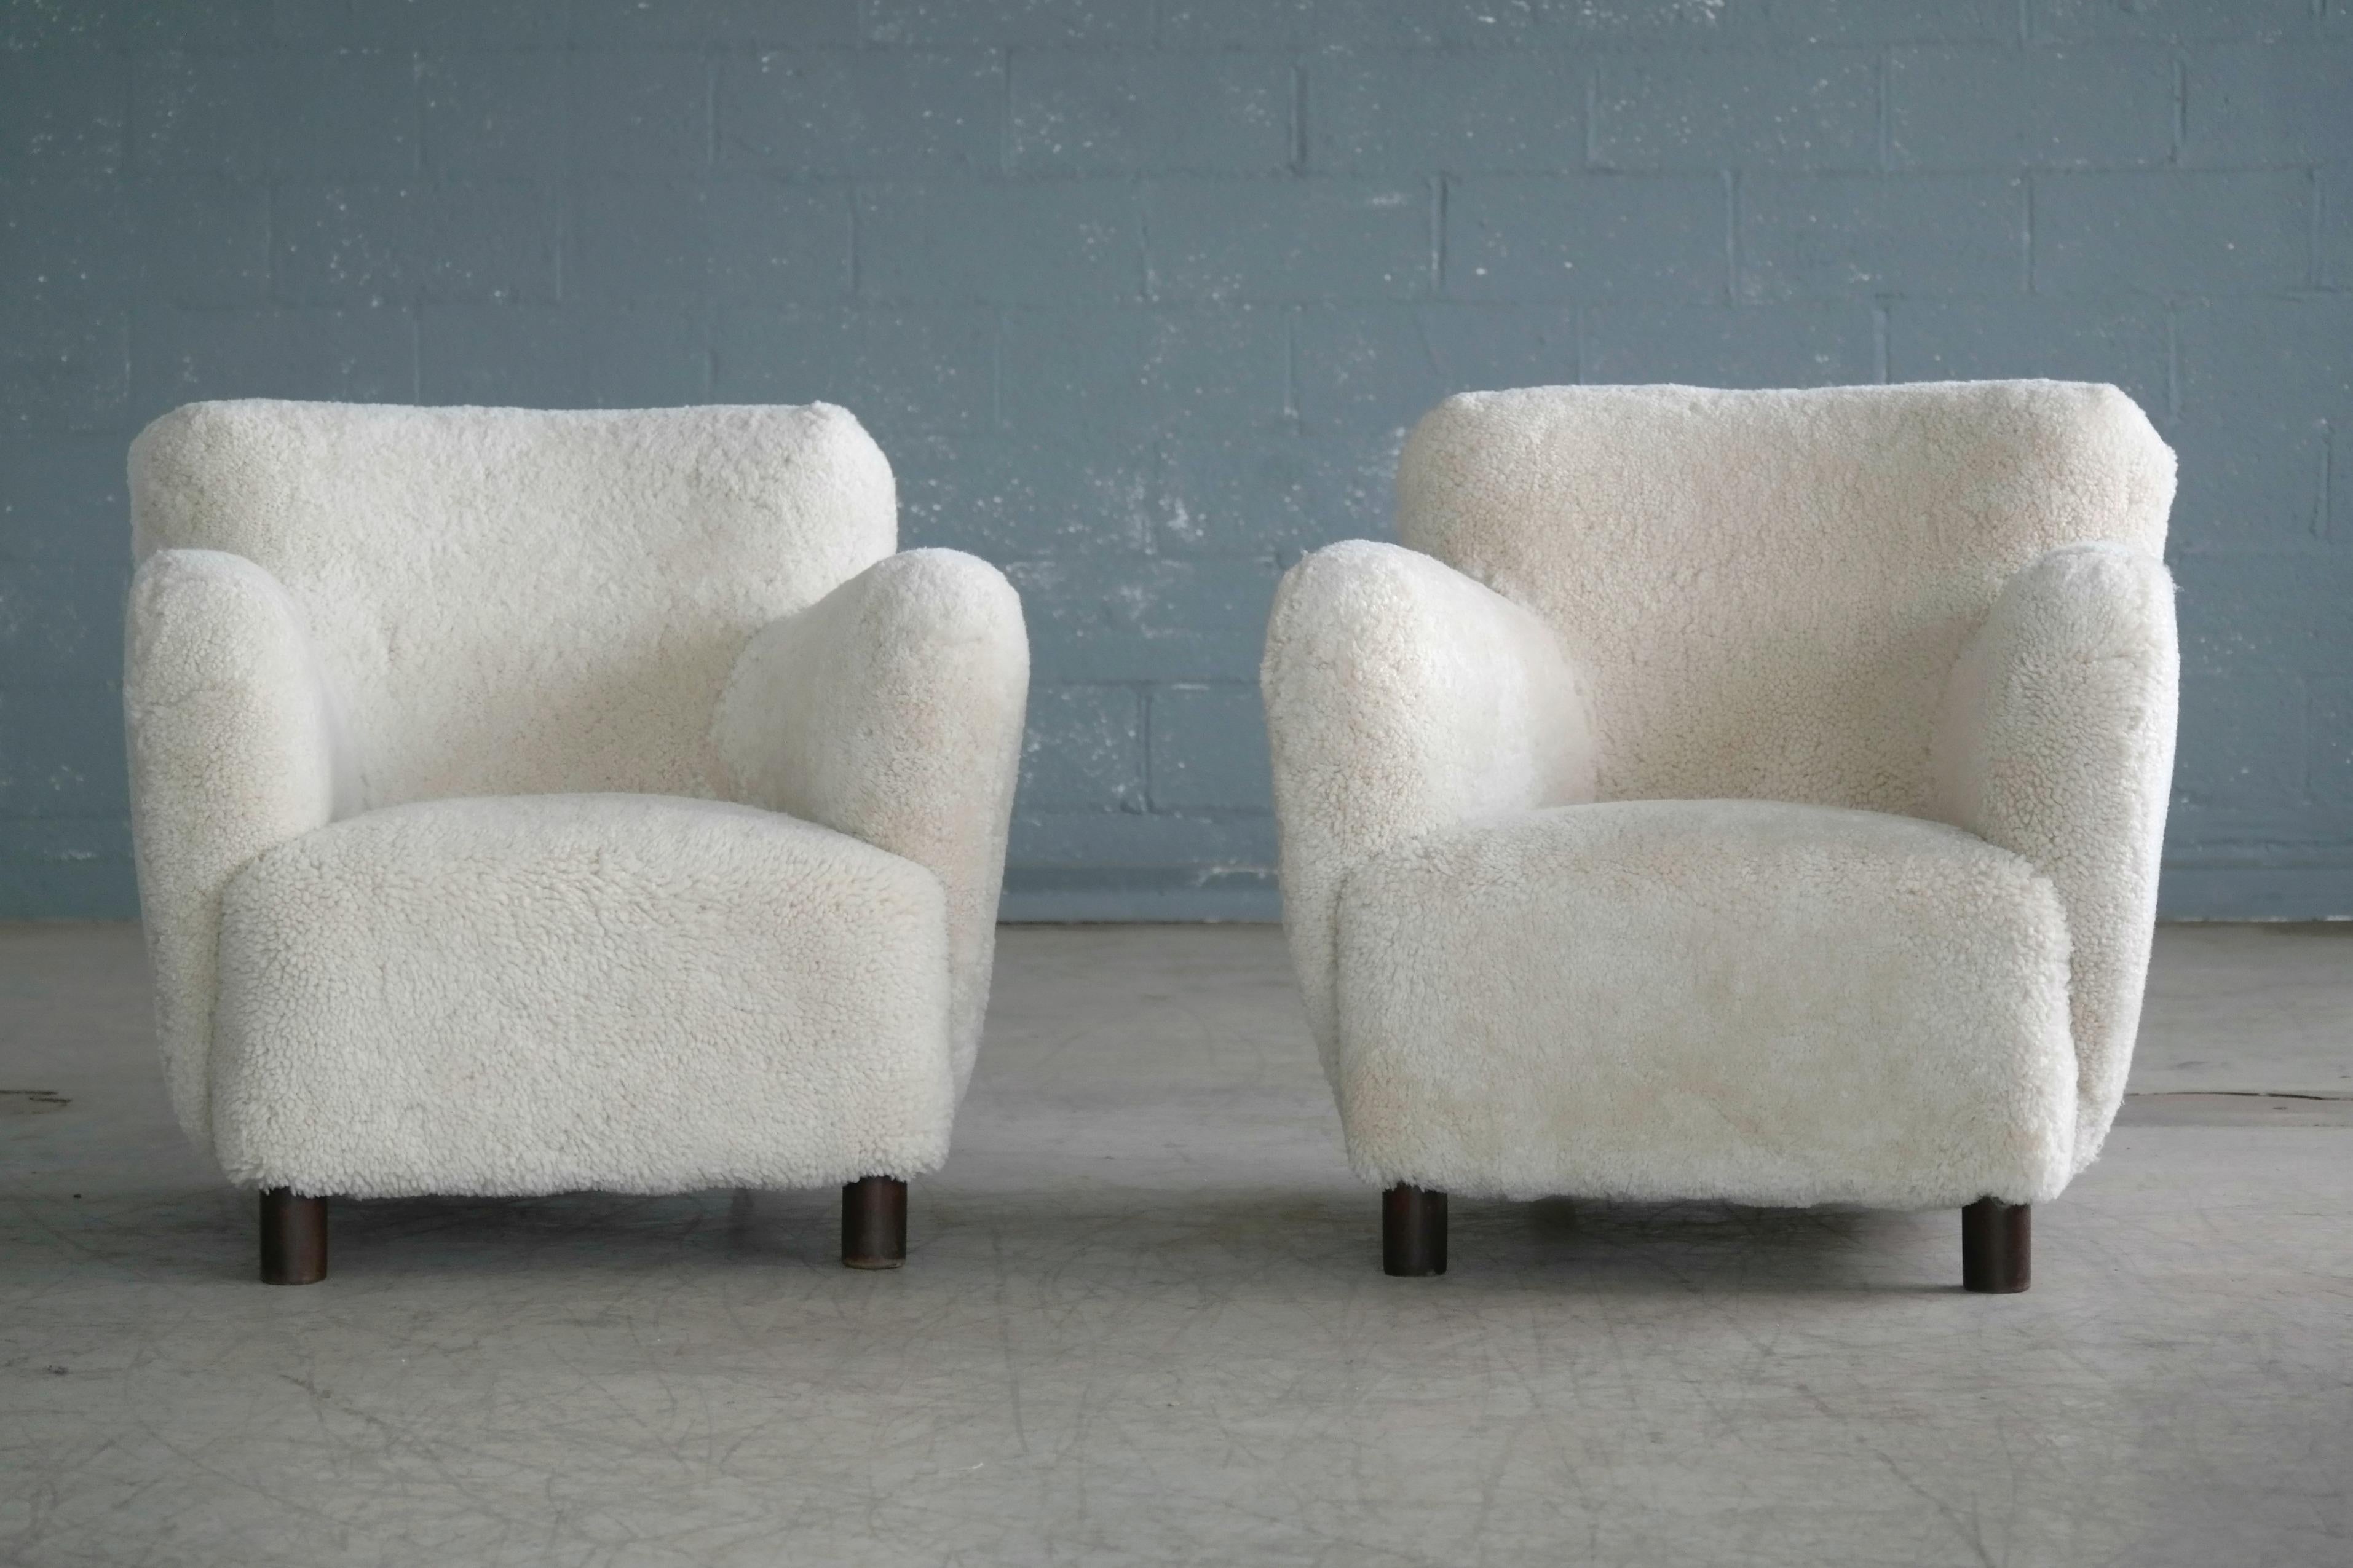 Rare to find Mogens Lassen attributed pair of lowback club or lounge chairs from the 1940s featuring the rounded armrest design and the cylindrical front legs that are very characteristic of Lassen. Lassen's unique style is increasingly coveted and